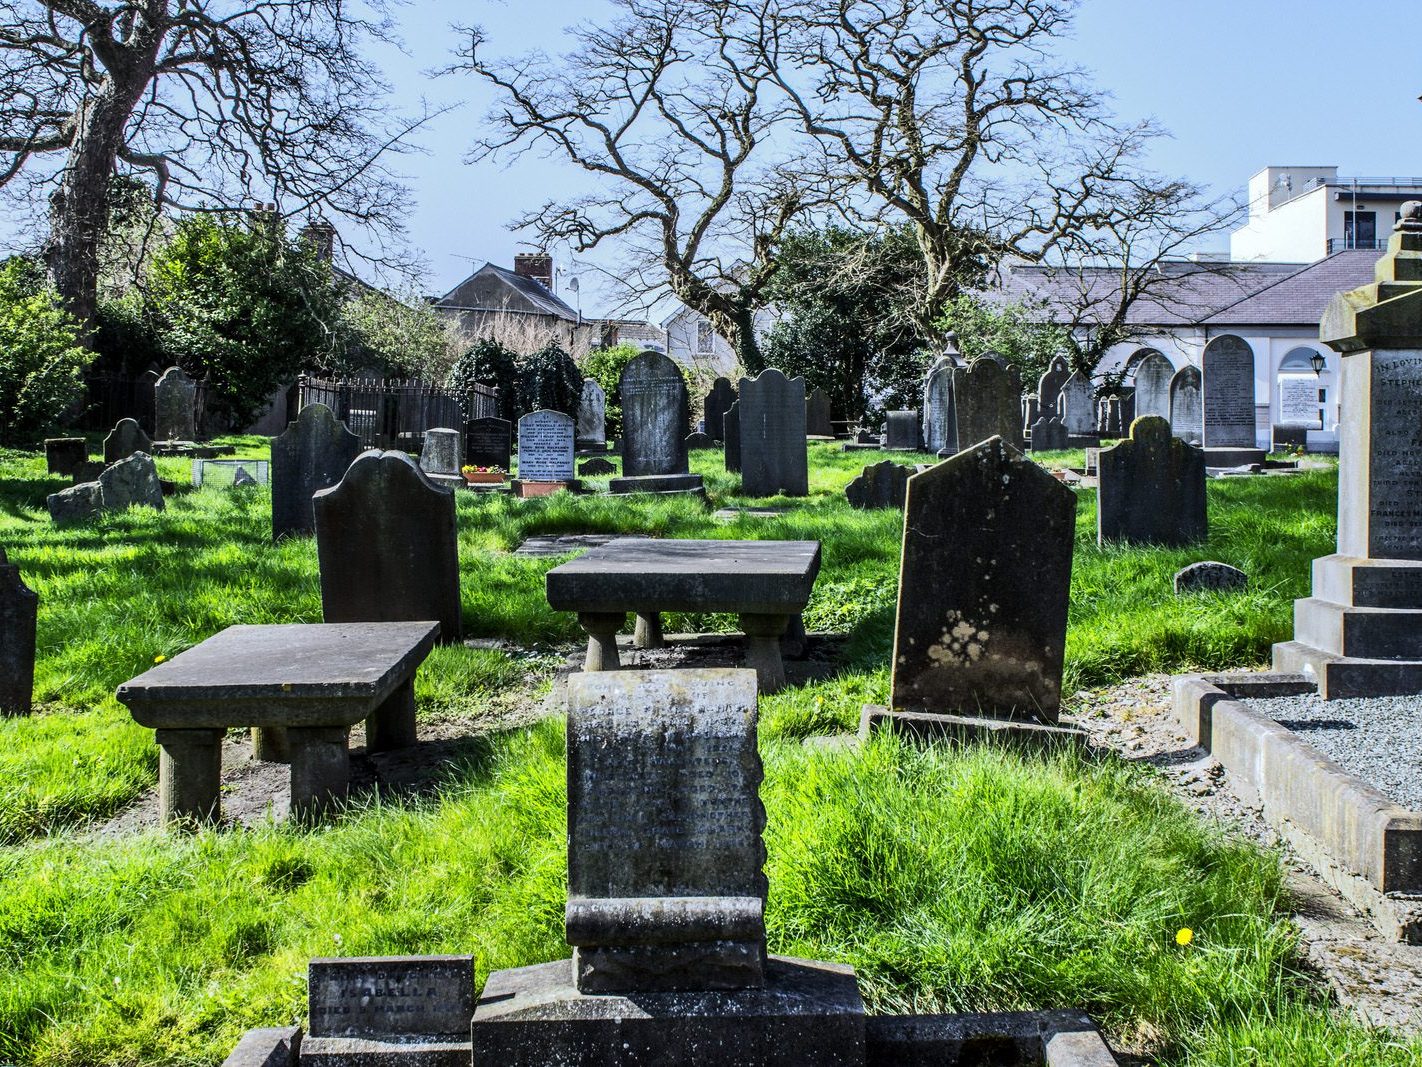 SOME OLD IMAGES OF ST PETERS CHURCHYARD IN DROGHEDA [PHOTOGRAPHED 20212]-224228-1